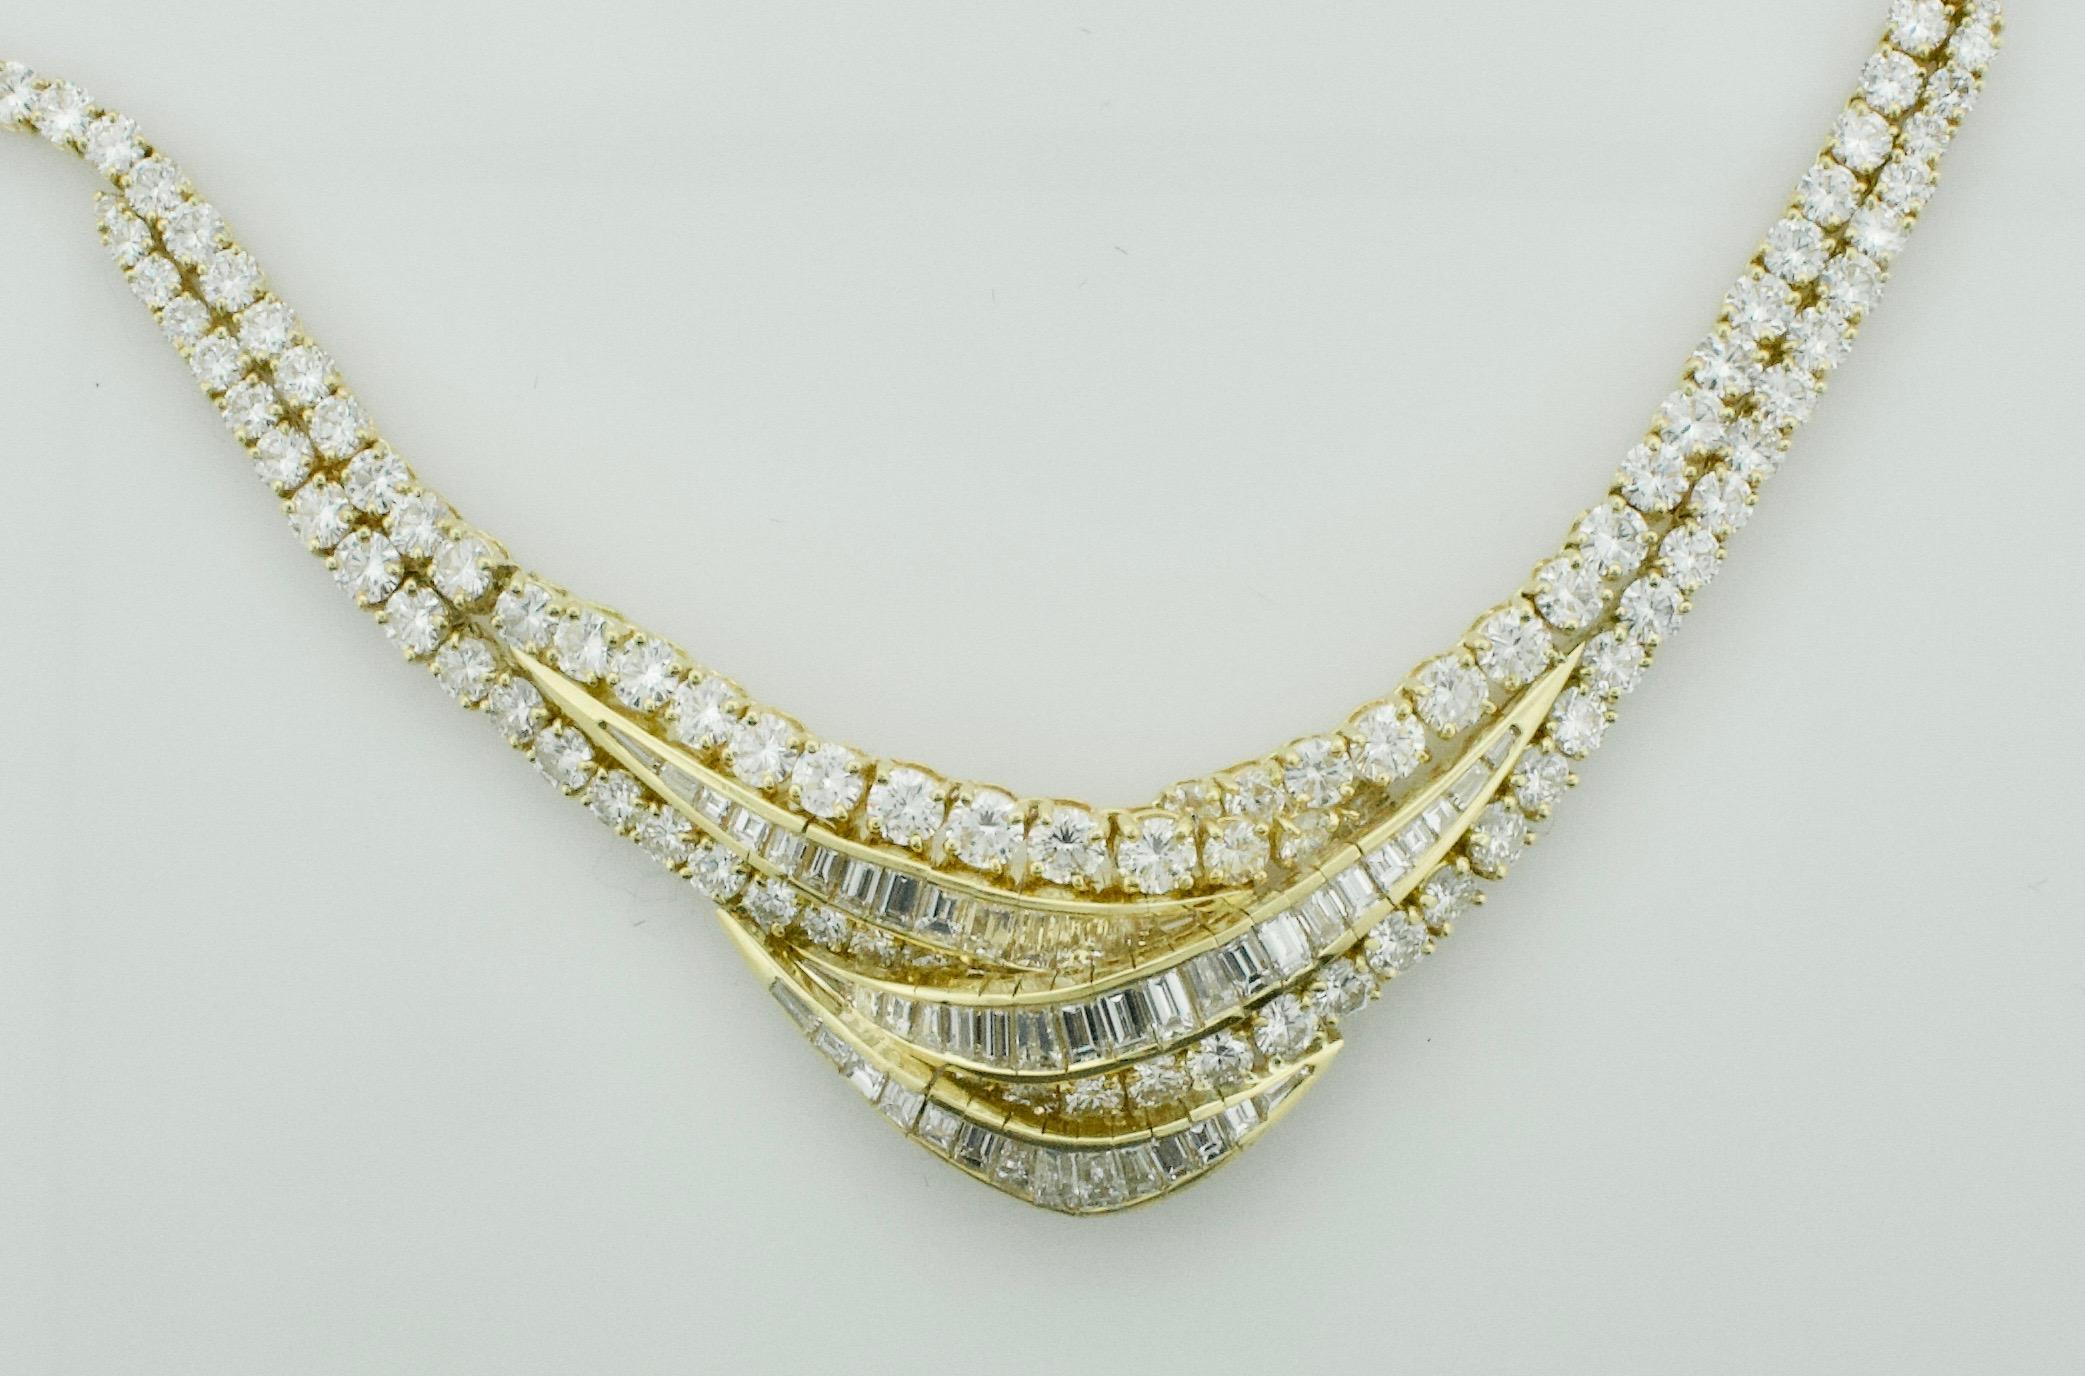 
Introducing a truly exquisite piece of jewelry: the Important Diamond Necklace in 18k with a staggering total weight of 28.41 carats. Crafted with precision and unparalleled elegance, this necklace boasts a stunning array of diamonds that will